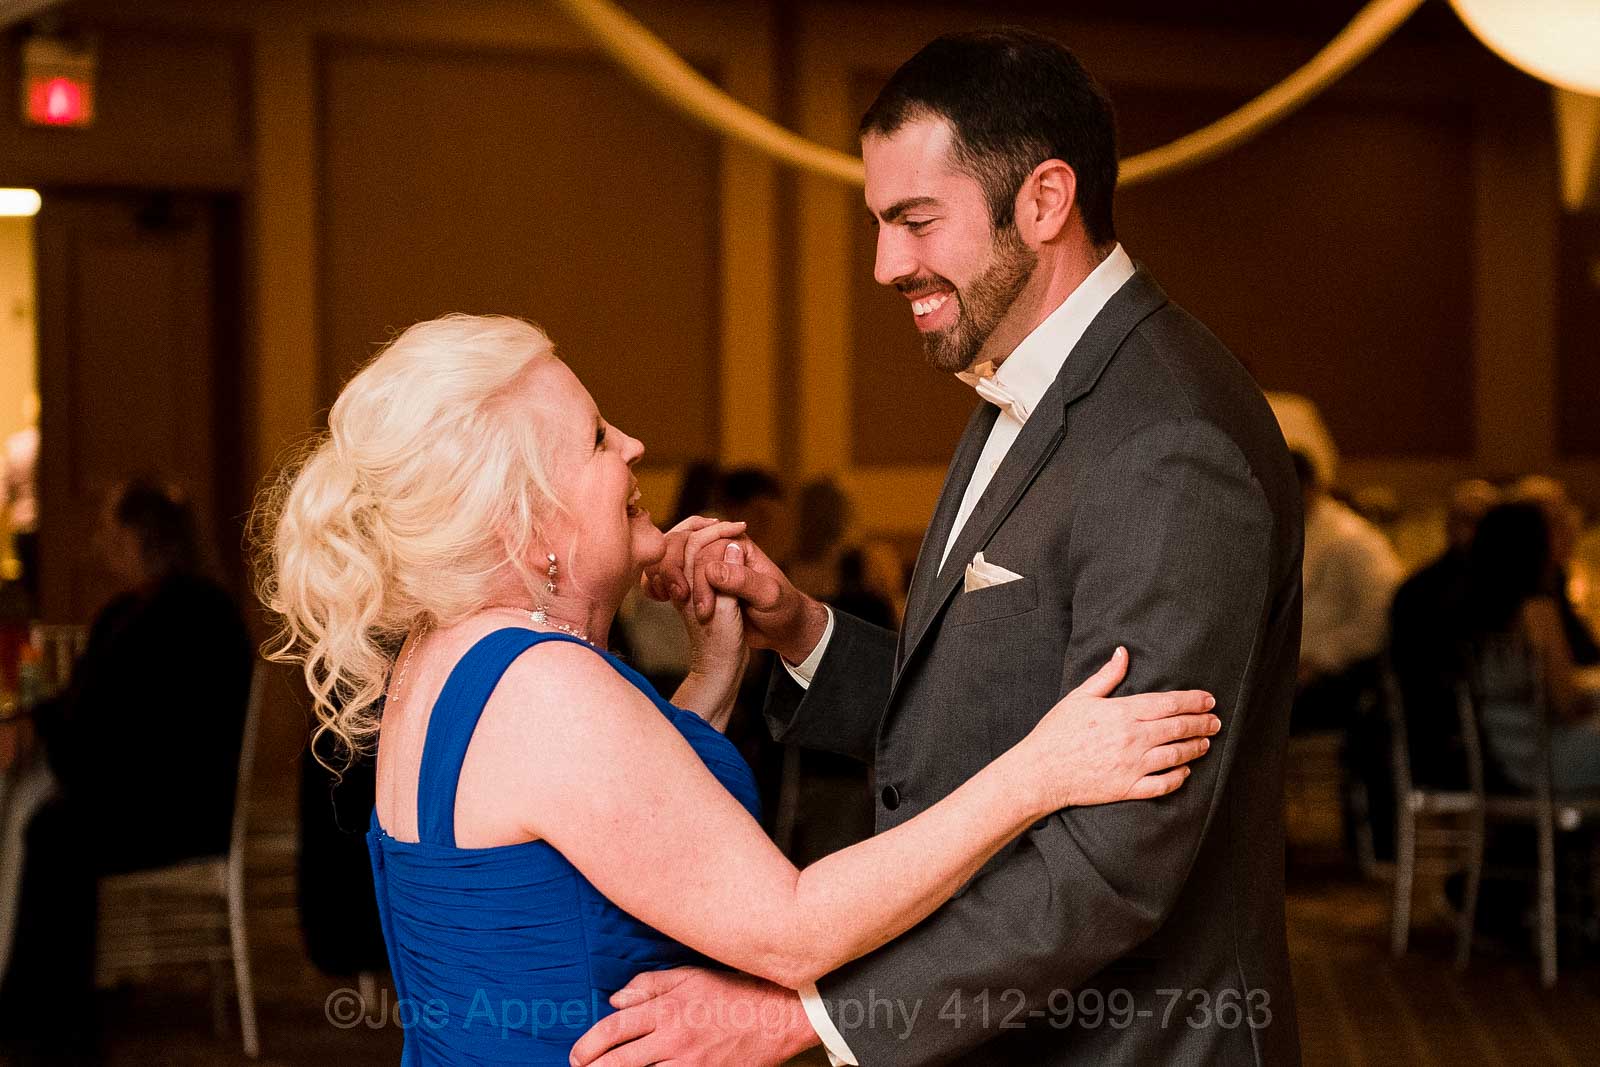 A groom dances with his mother, who is wearing a blue dress, during his wedding reception at the Embassy Suites hotel in Pittsburgh.